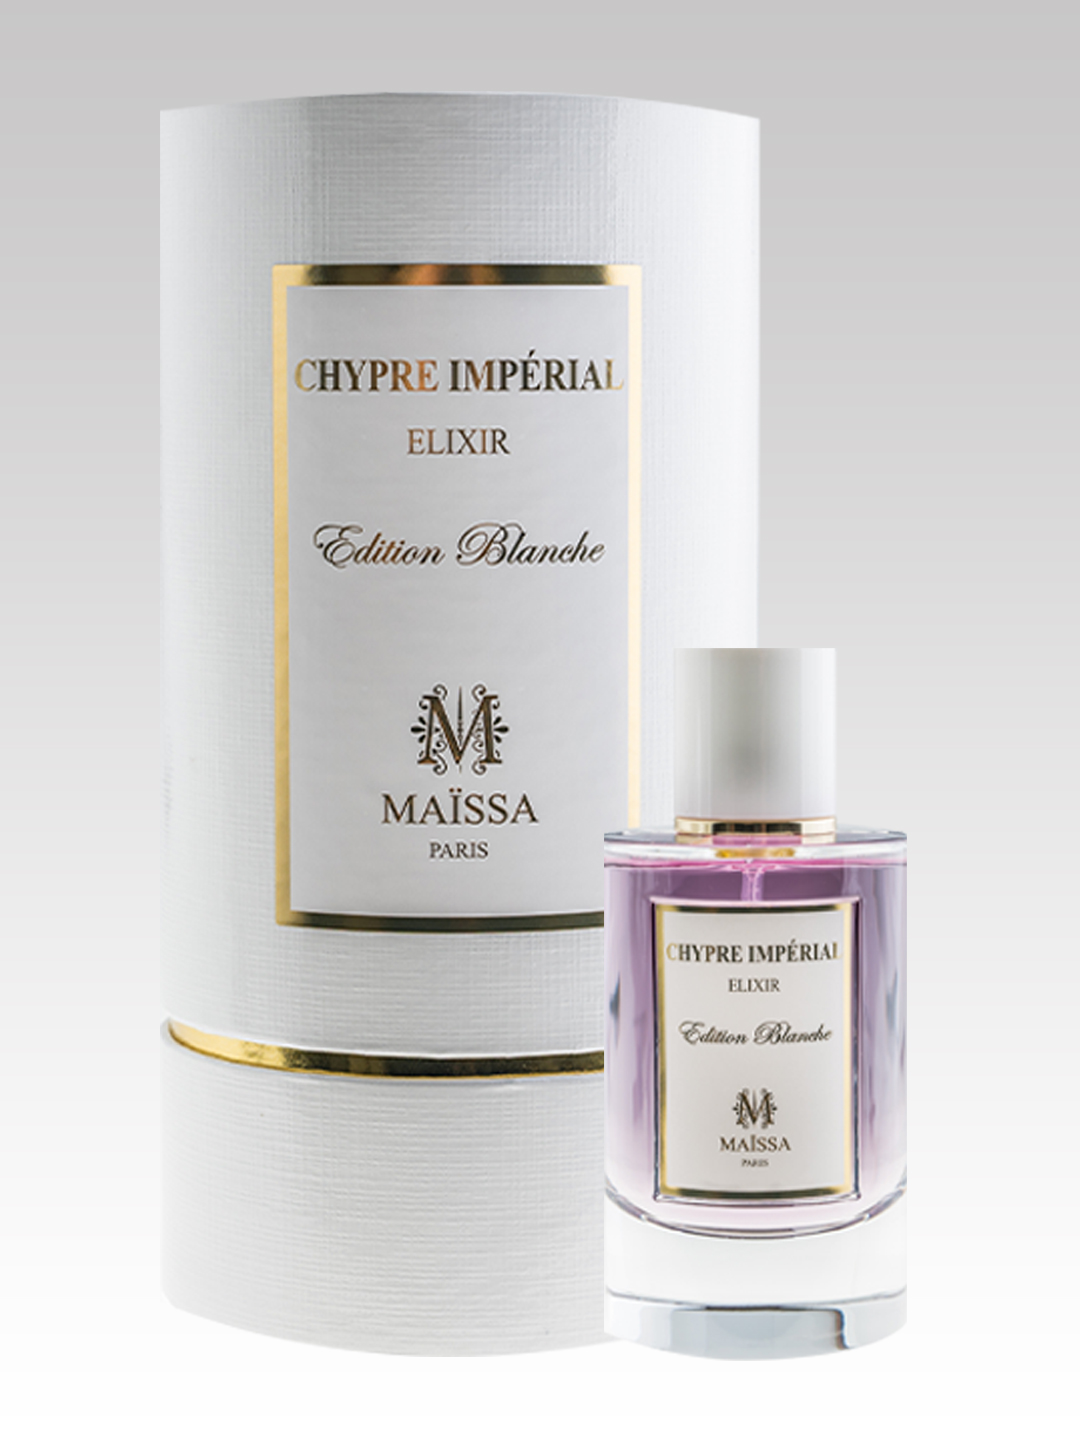 Chypre Imperial